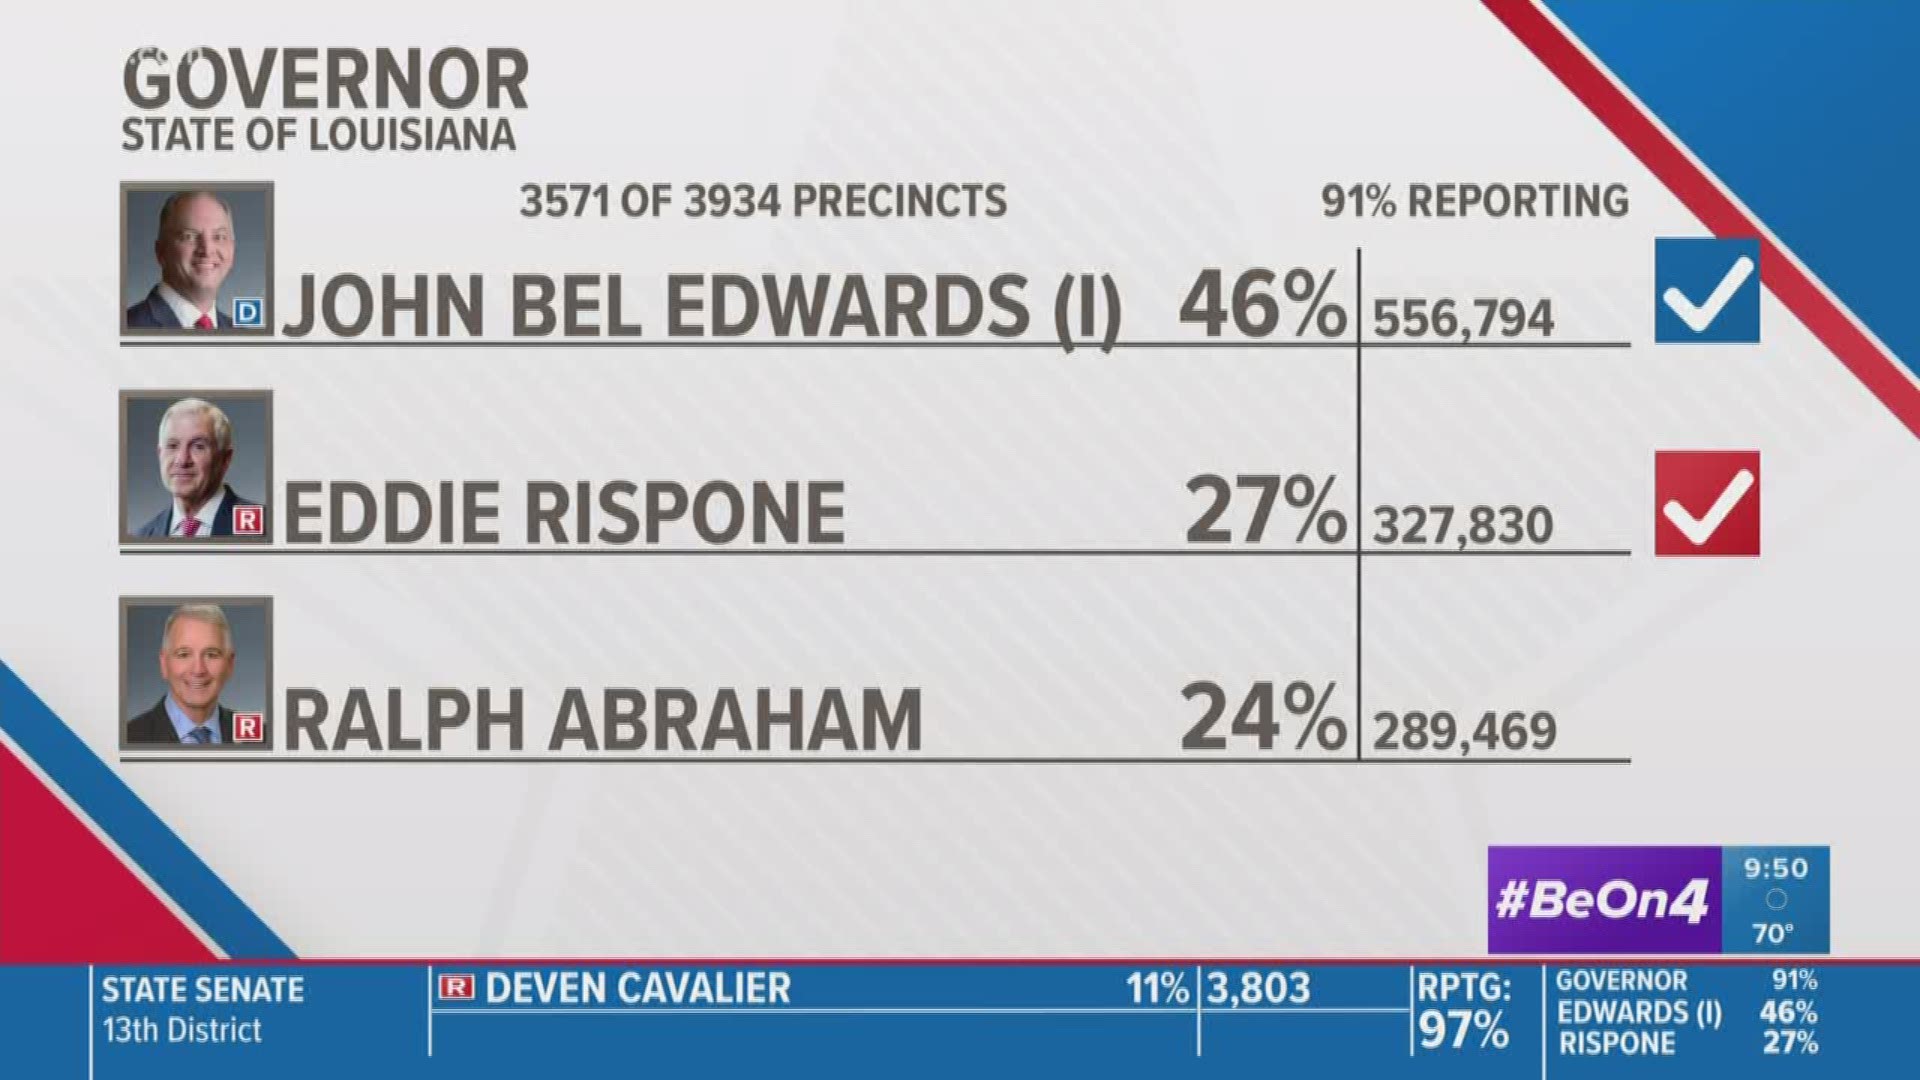 Republican dark horse candidate Eddie Rispone will take on Gov. John Bel Edwards in a runoff for the Louisiana Governor's office.